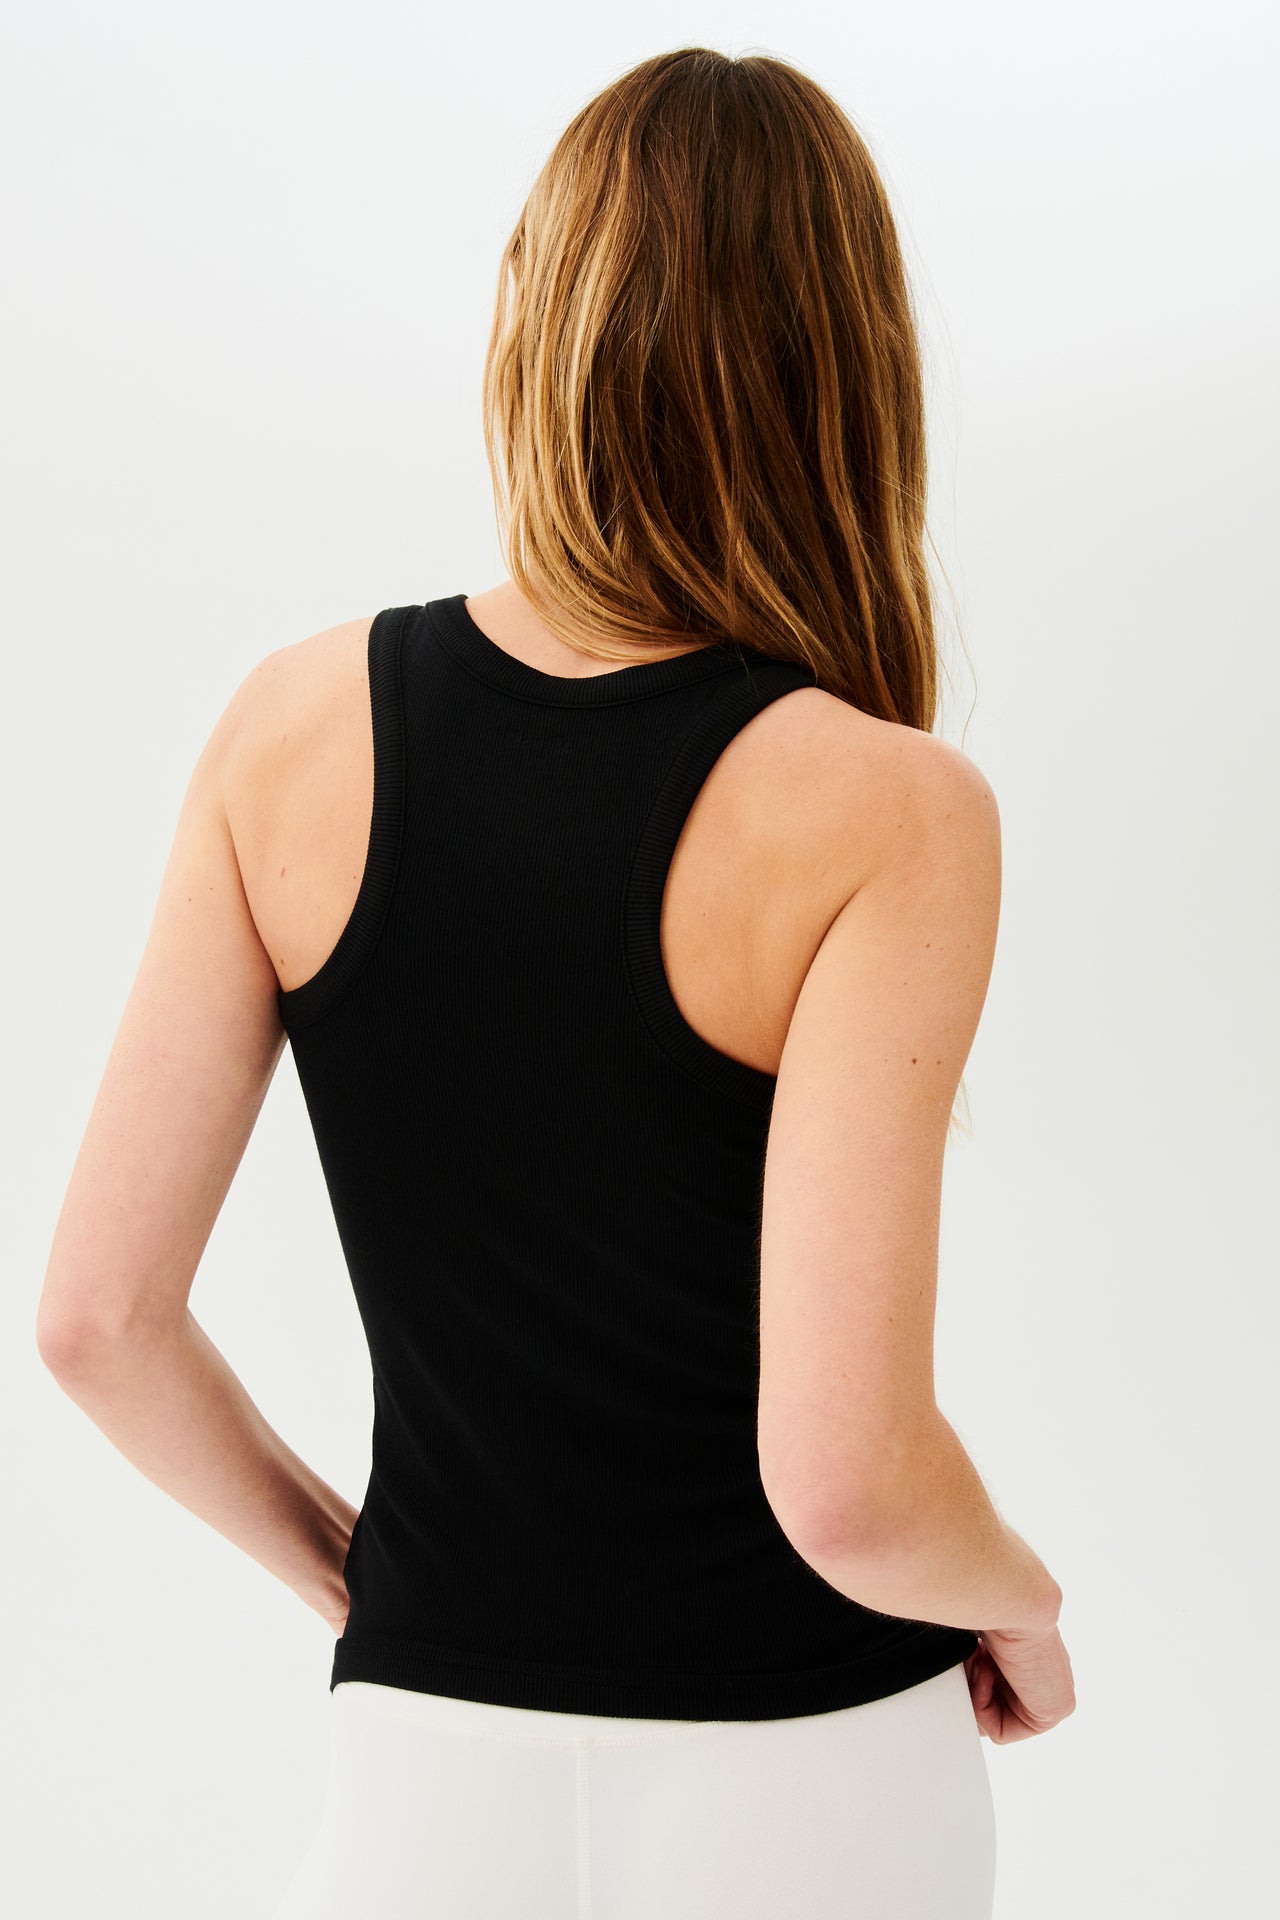 The back view of a woman wearing a SPLITS59 Kiki Rib Tank Full Length - Black during her gym workouts.